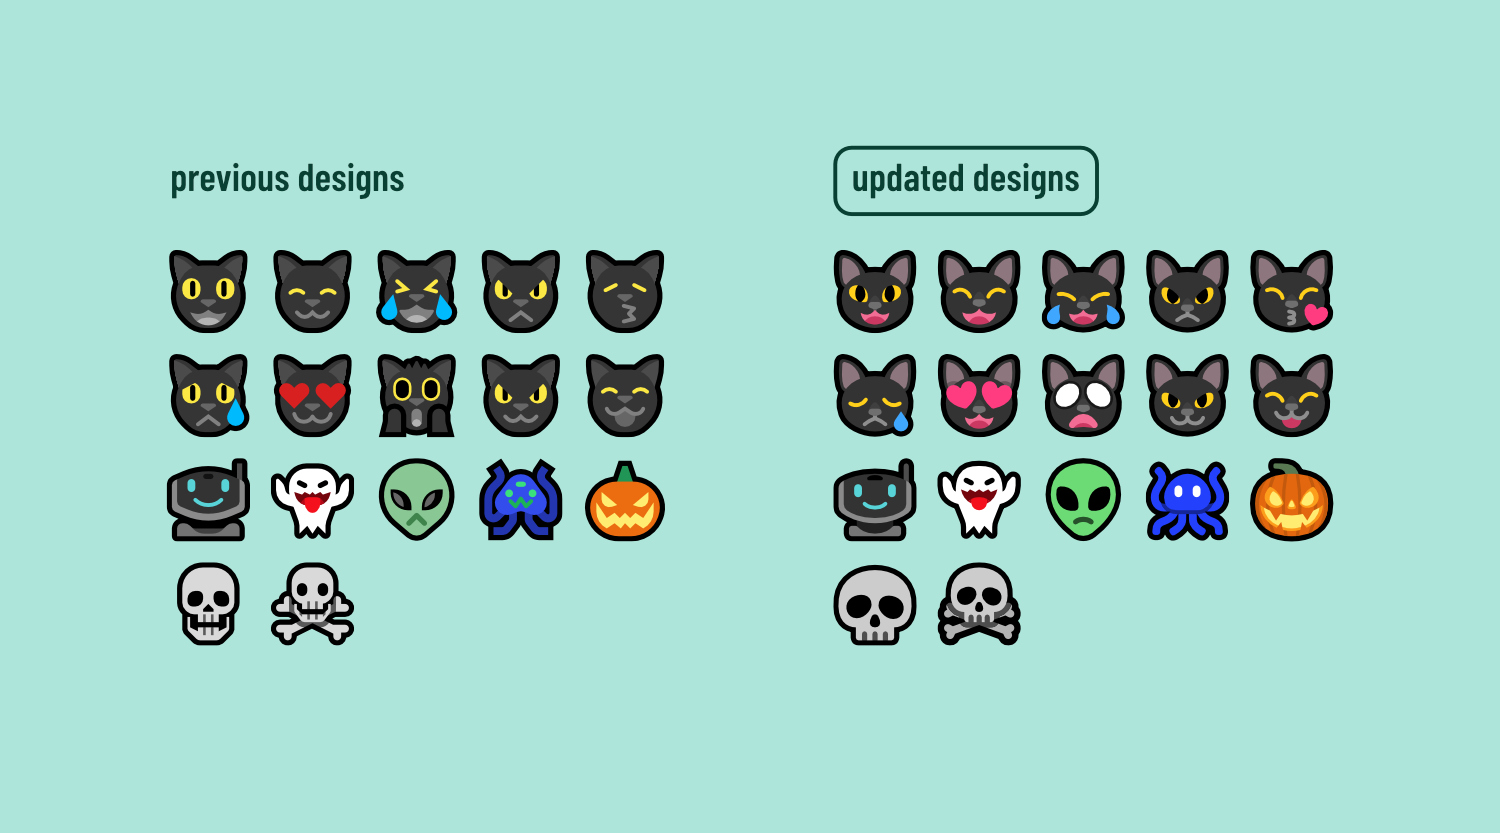 A mint green background divided into two sections. The left section is labeled "previous designs" and shows various black cat faces with different expressions, a robot head, a ghost, an alien, a spider, and a jack-o'-lantern. The right section is labeled "updated designs" and shows the same icons but with updated designs that are clearer, more expressive and with softer shapes.